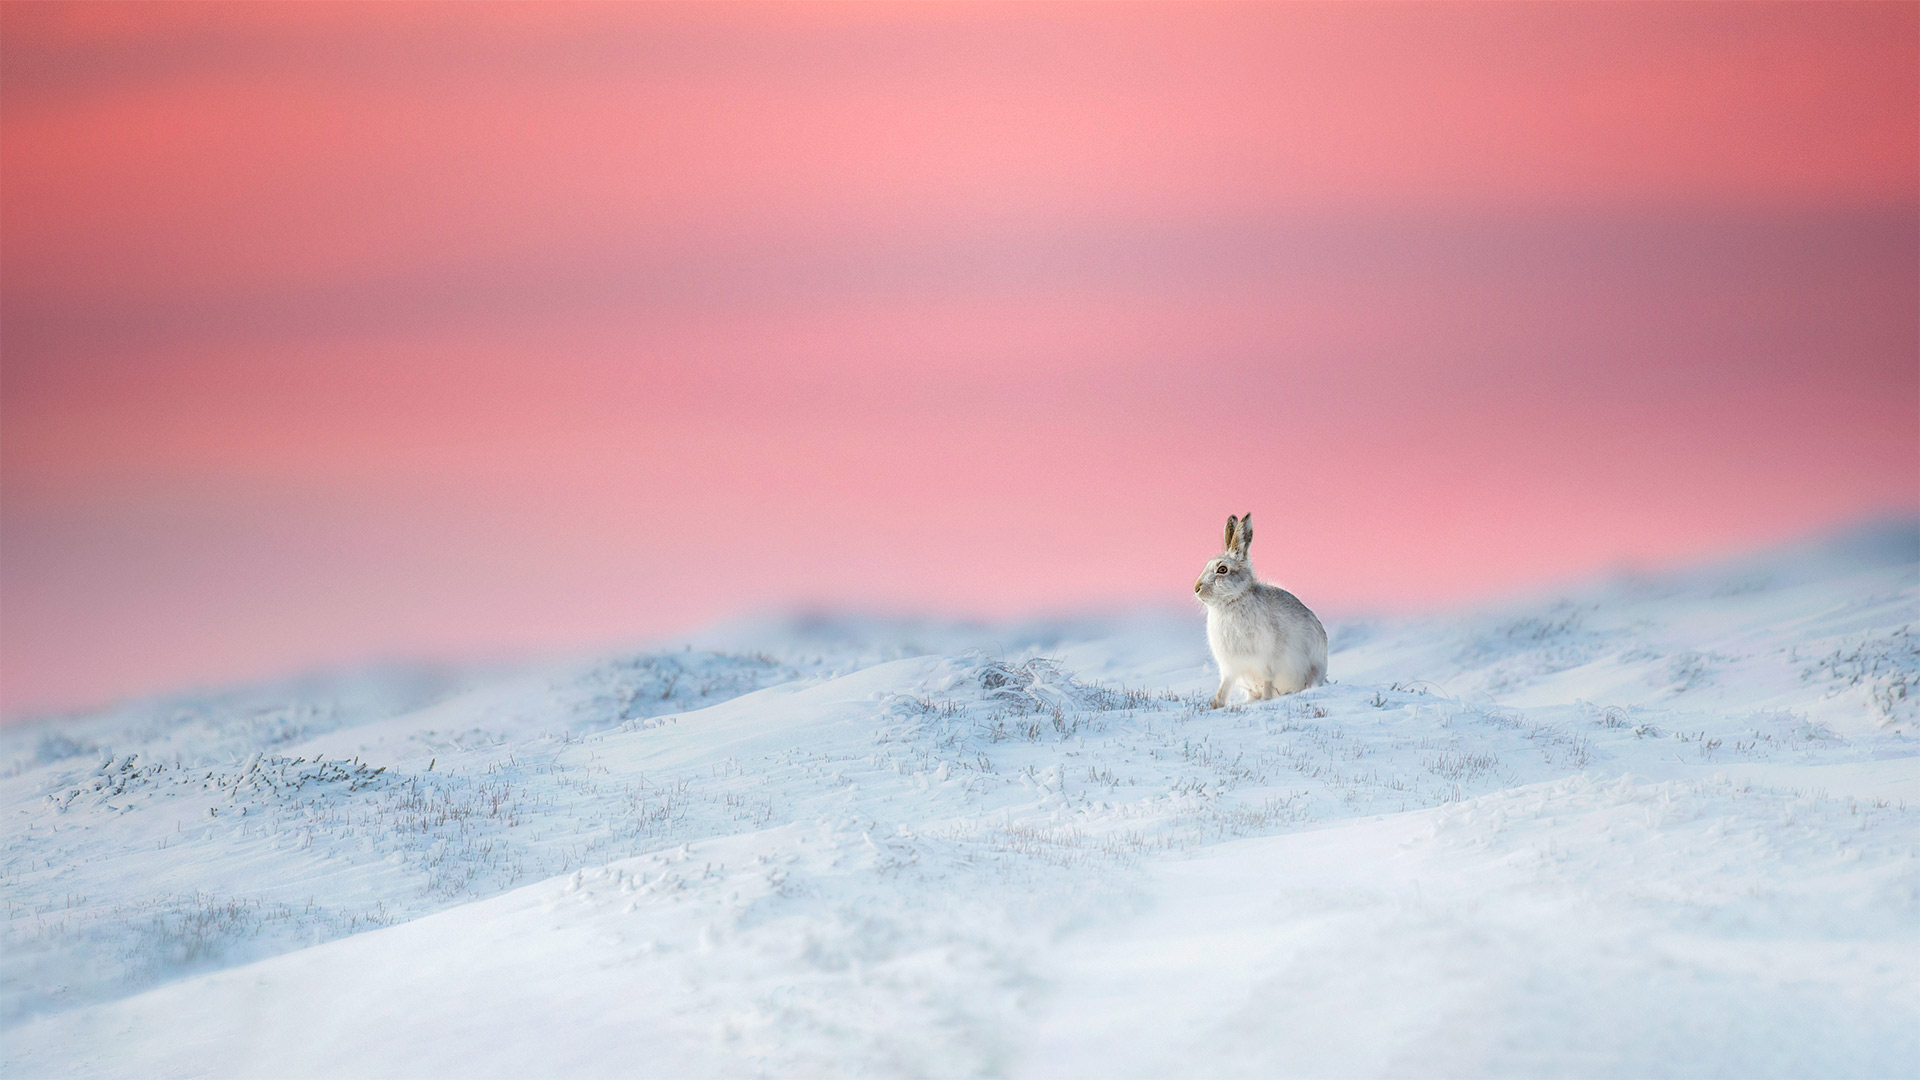 Mountain hare in Derbyshire, England - Ben Hall